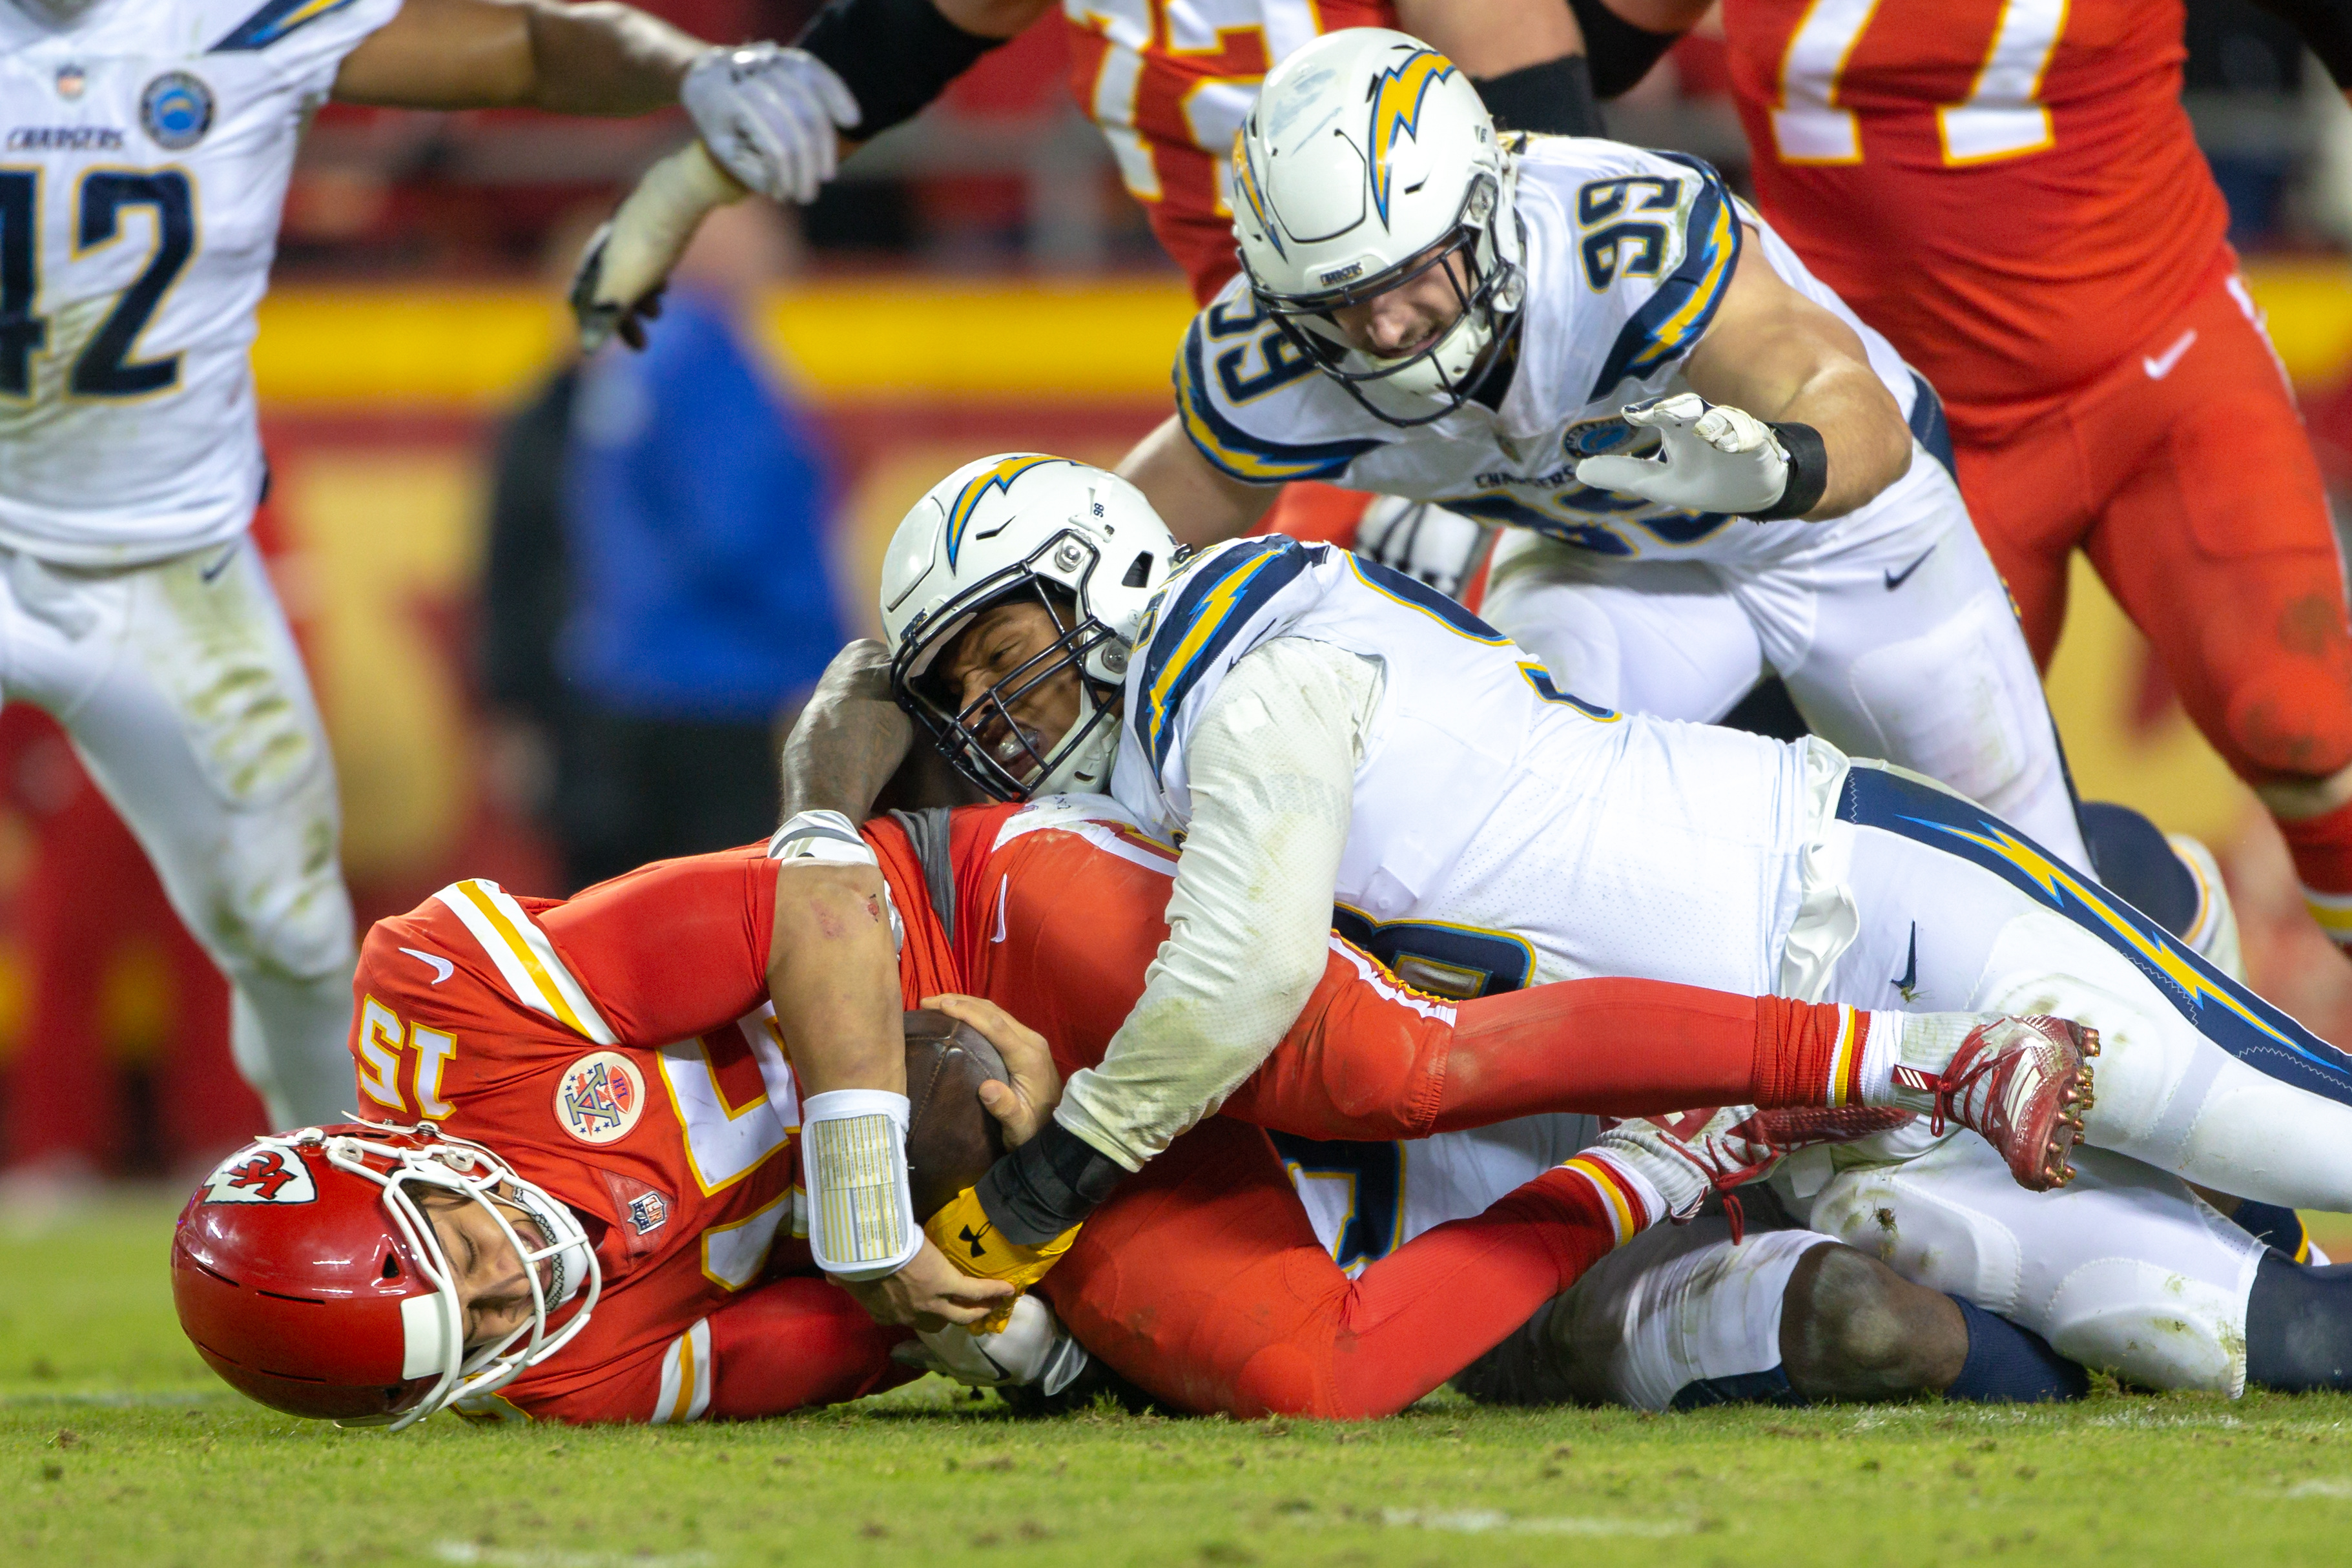 NFL: DEC 13 Chargers at Chiefs